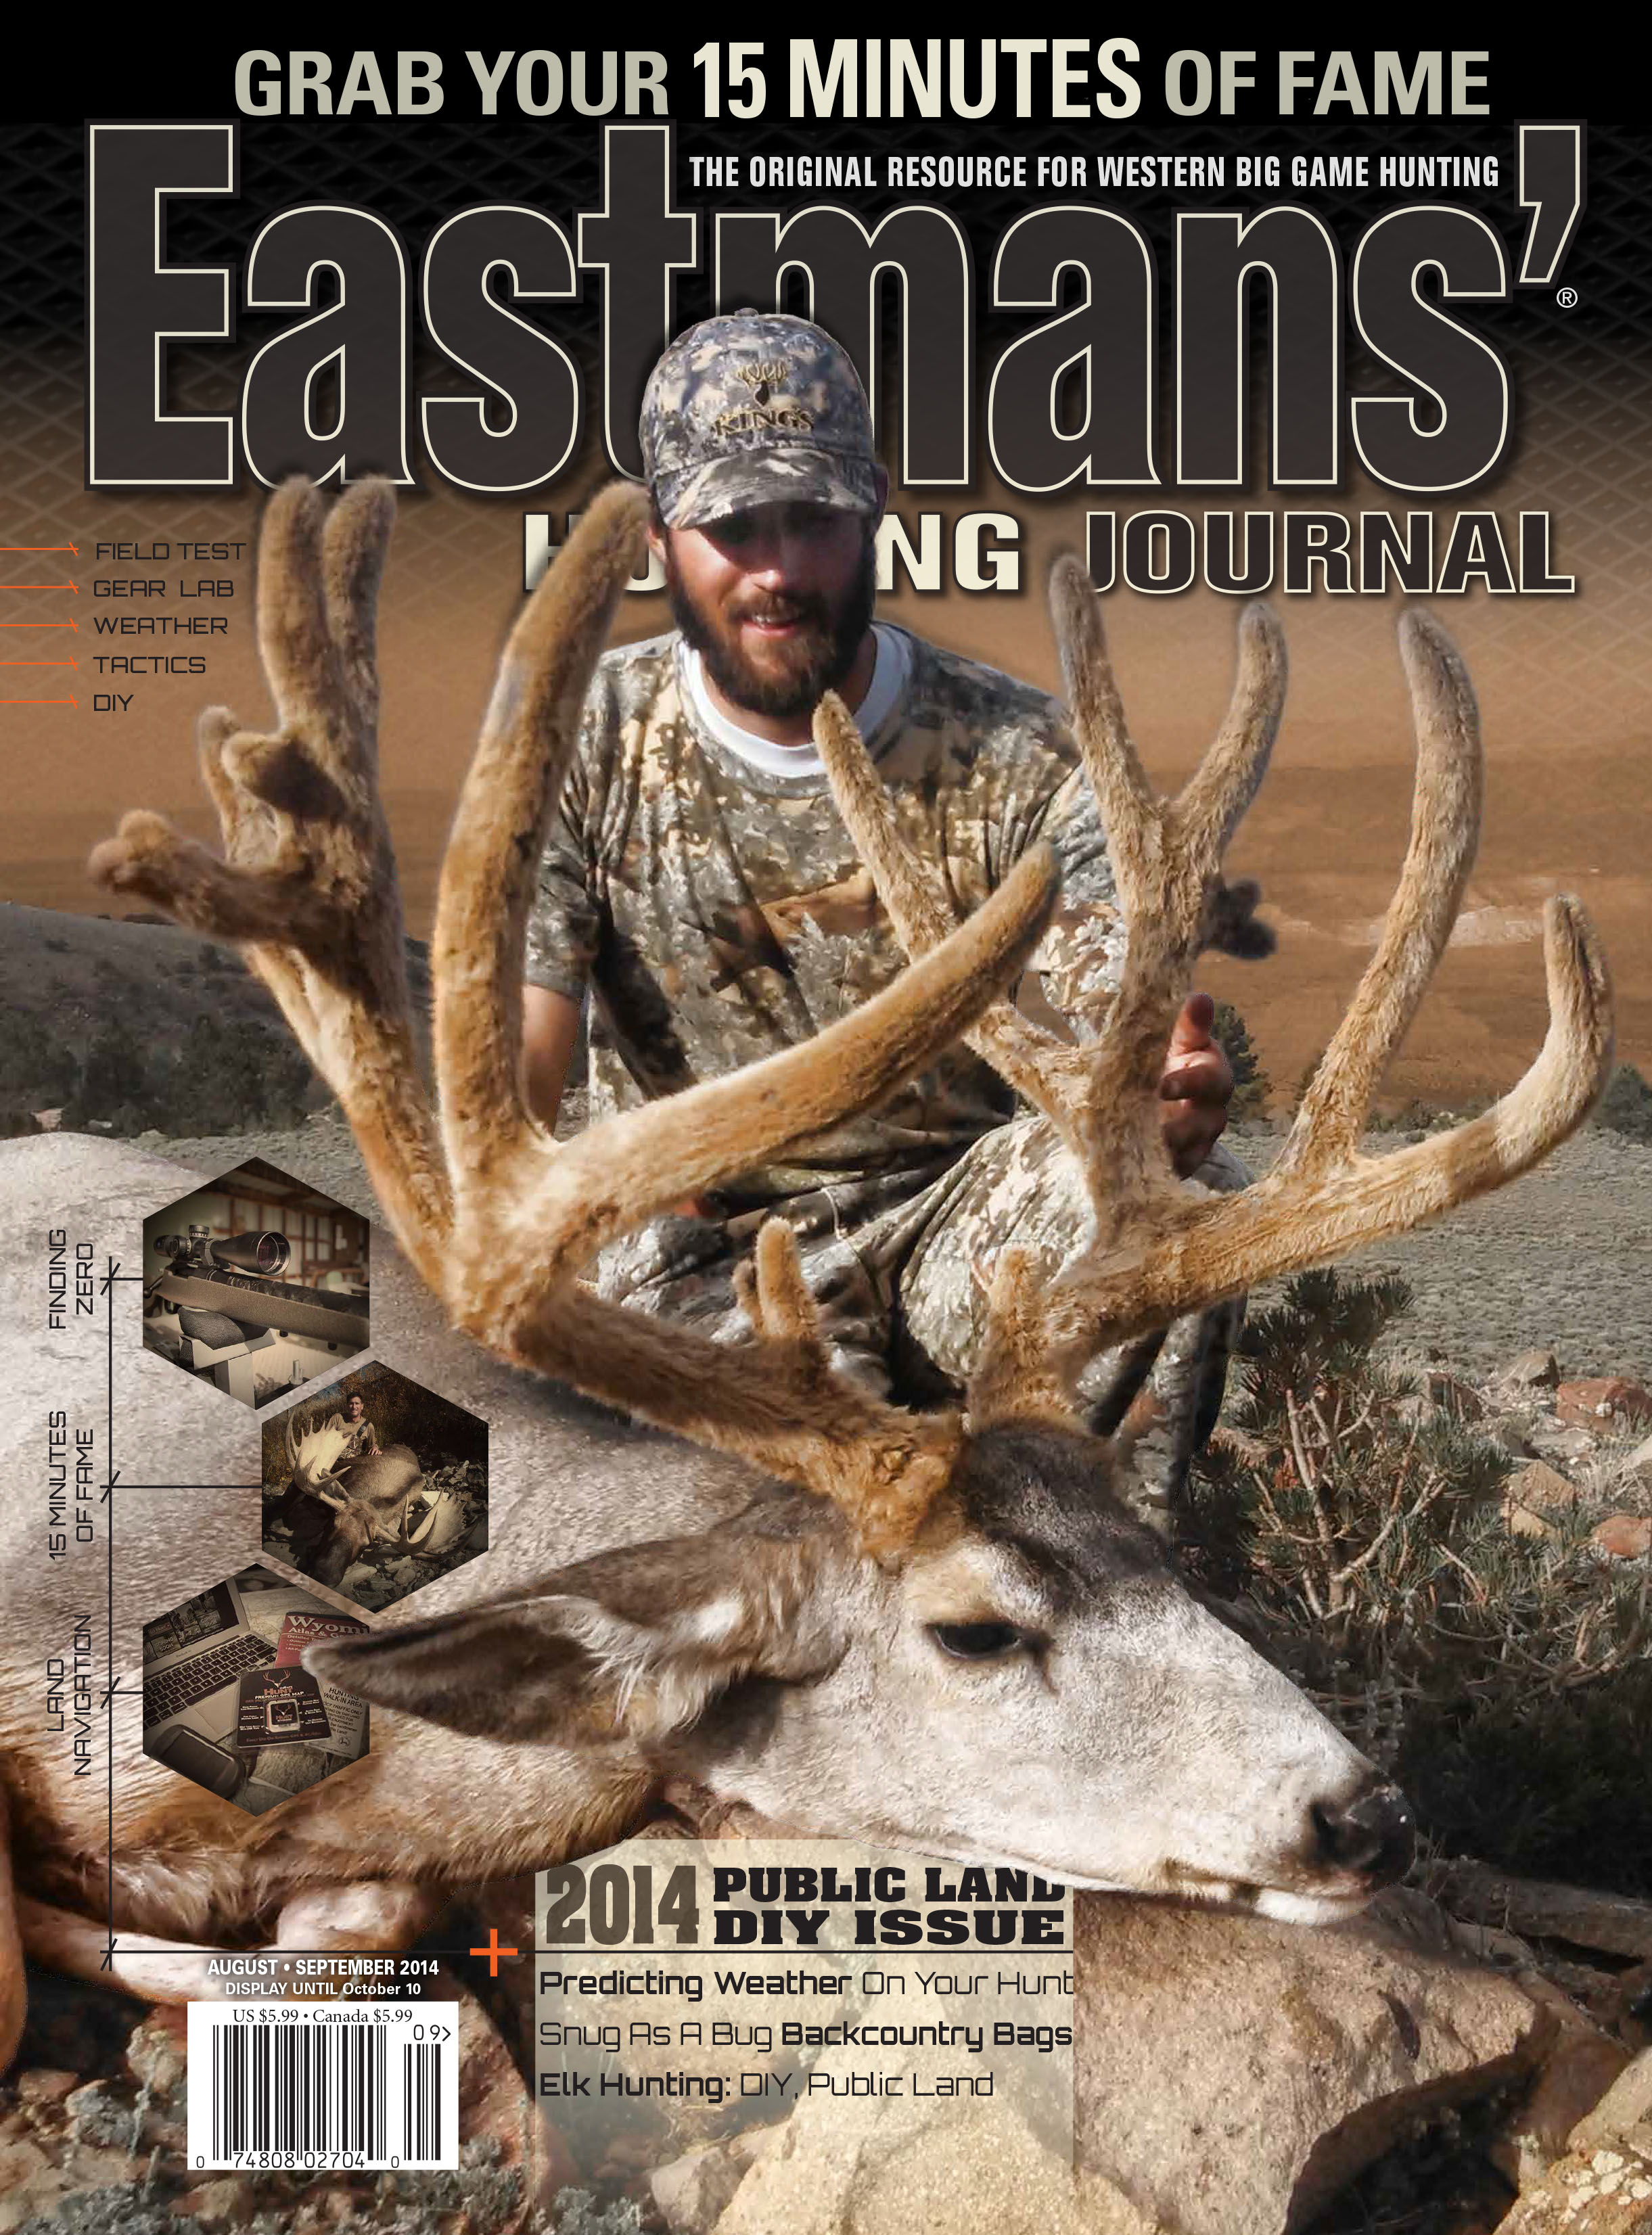 Eastmans' Hunting Journal Cover Issue 144 - © Eastmans' Publishing, Inc.